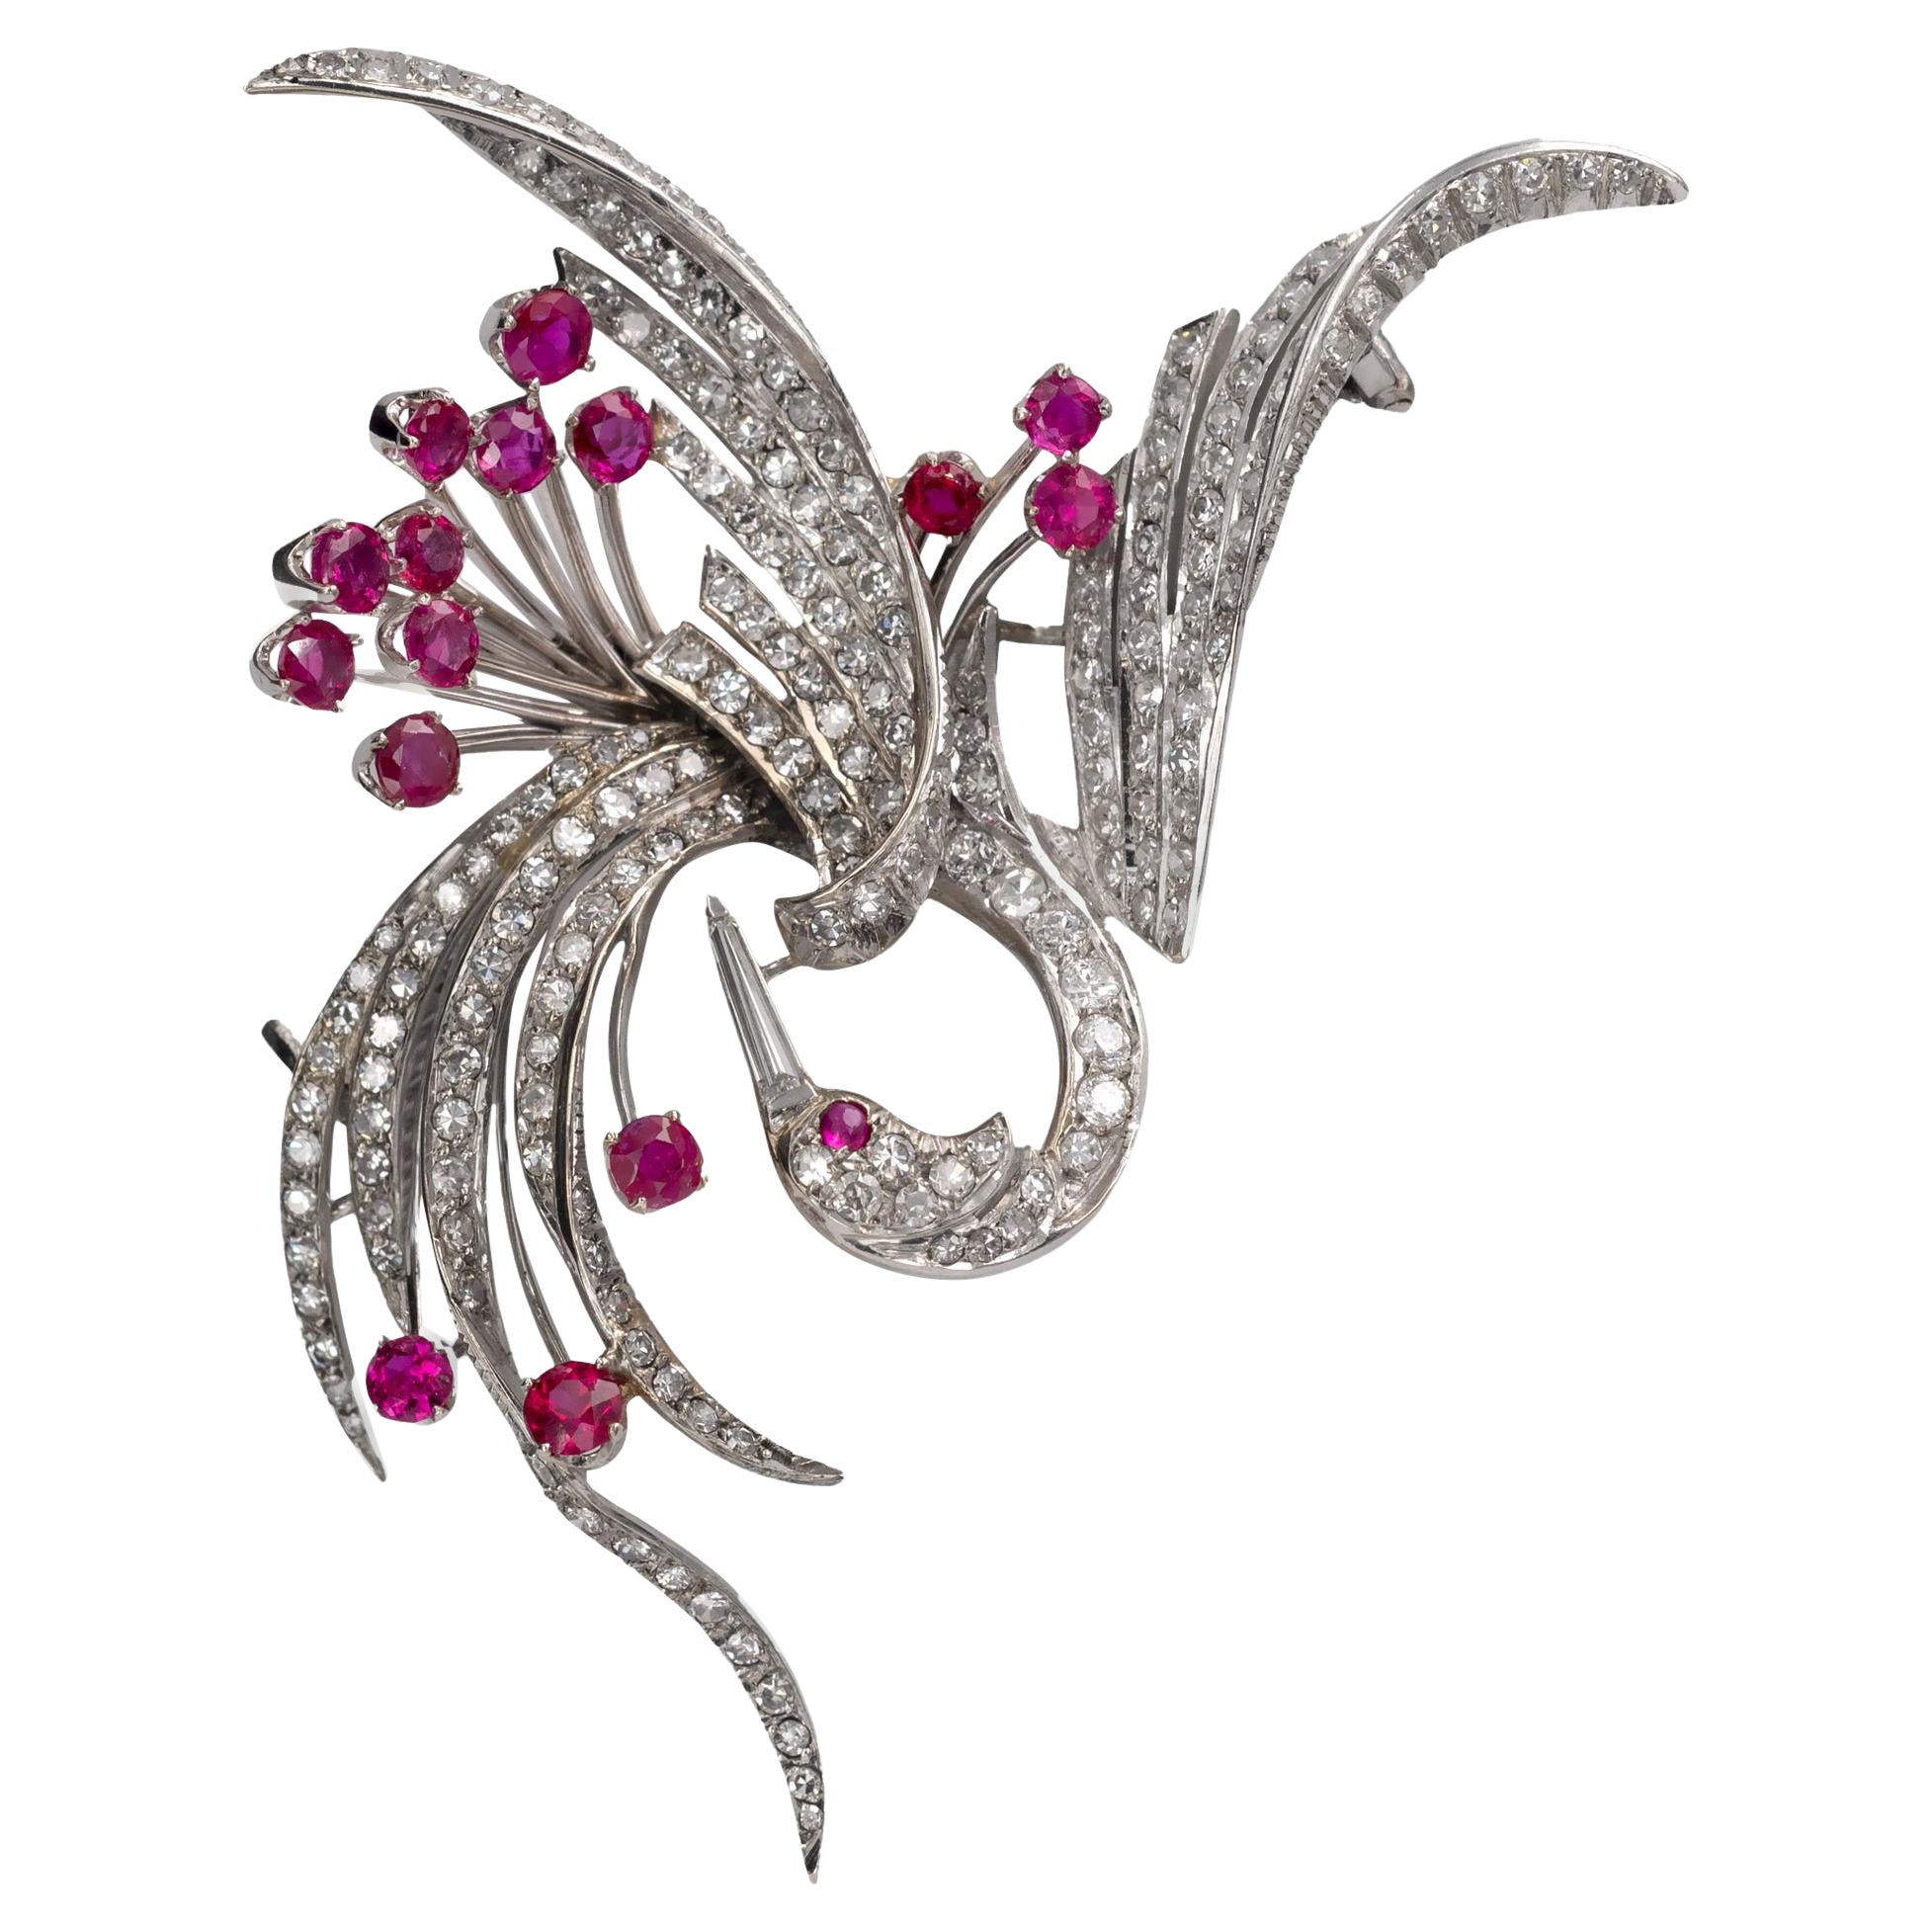 Mid-20th Century White Gold Bird Brooch with Pavé Diamonds and Ruby Accents For Sale